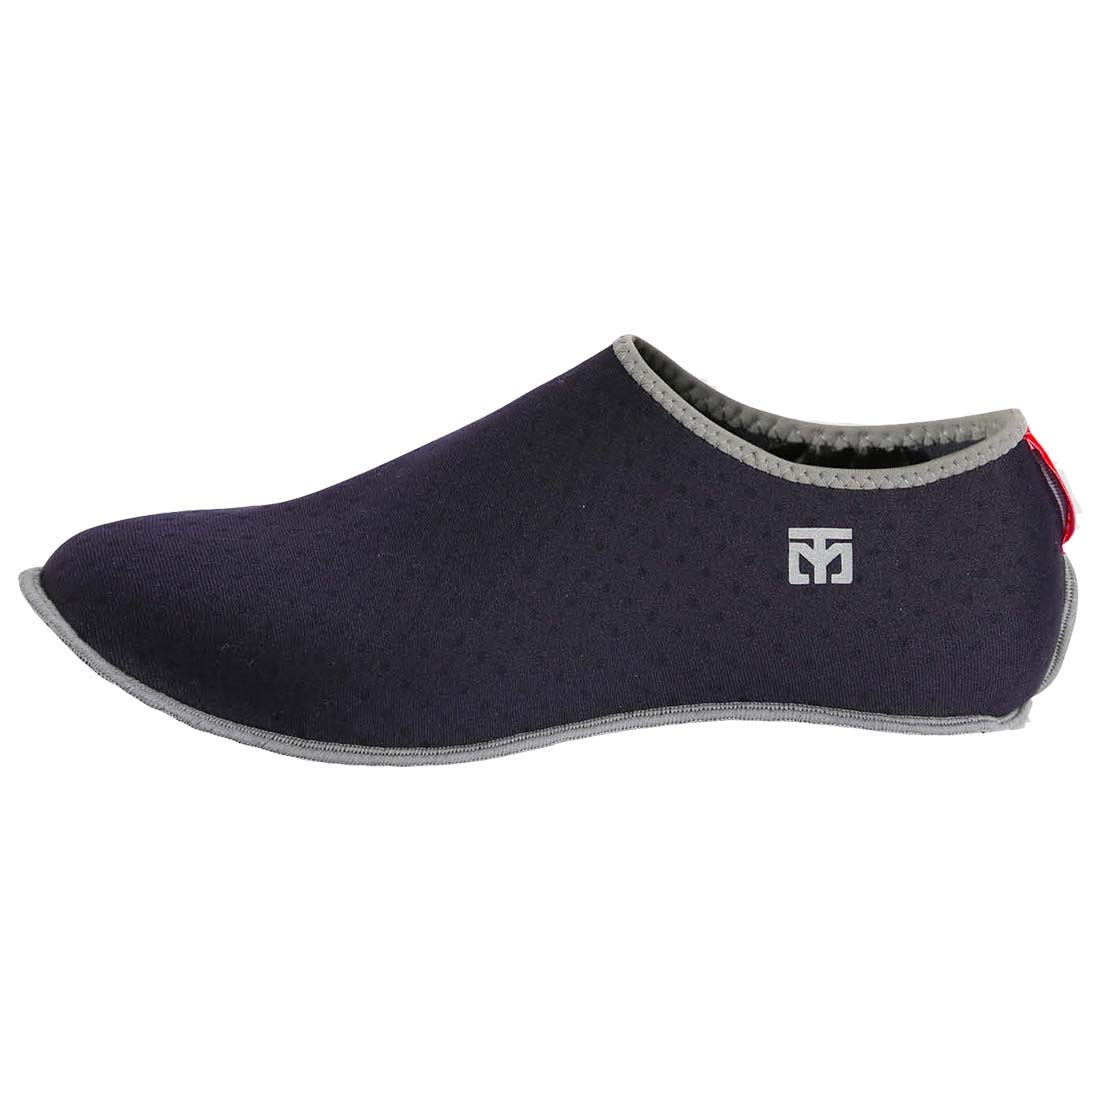 Mooto Korea Taekwondo MarShoes Mar Shoes with Pouch MMA Martial Arts Yoga  Gym Academy School House Skin Socks Type Red and Navy 2 Colors Navy 5.  L(255265 mm or 9.8410.43 inch)